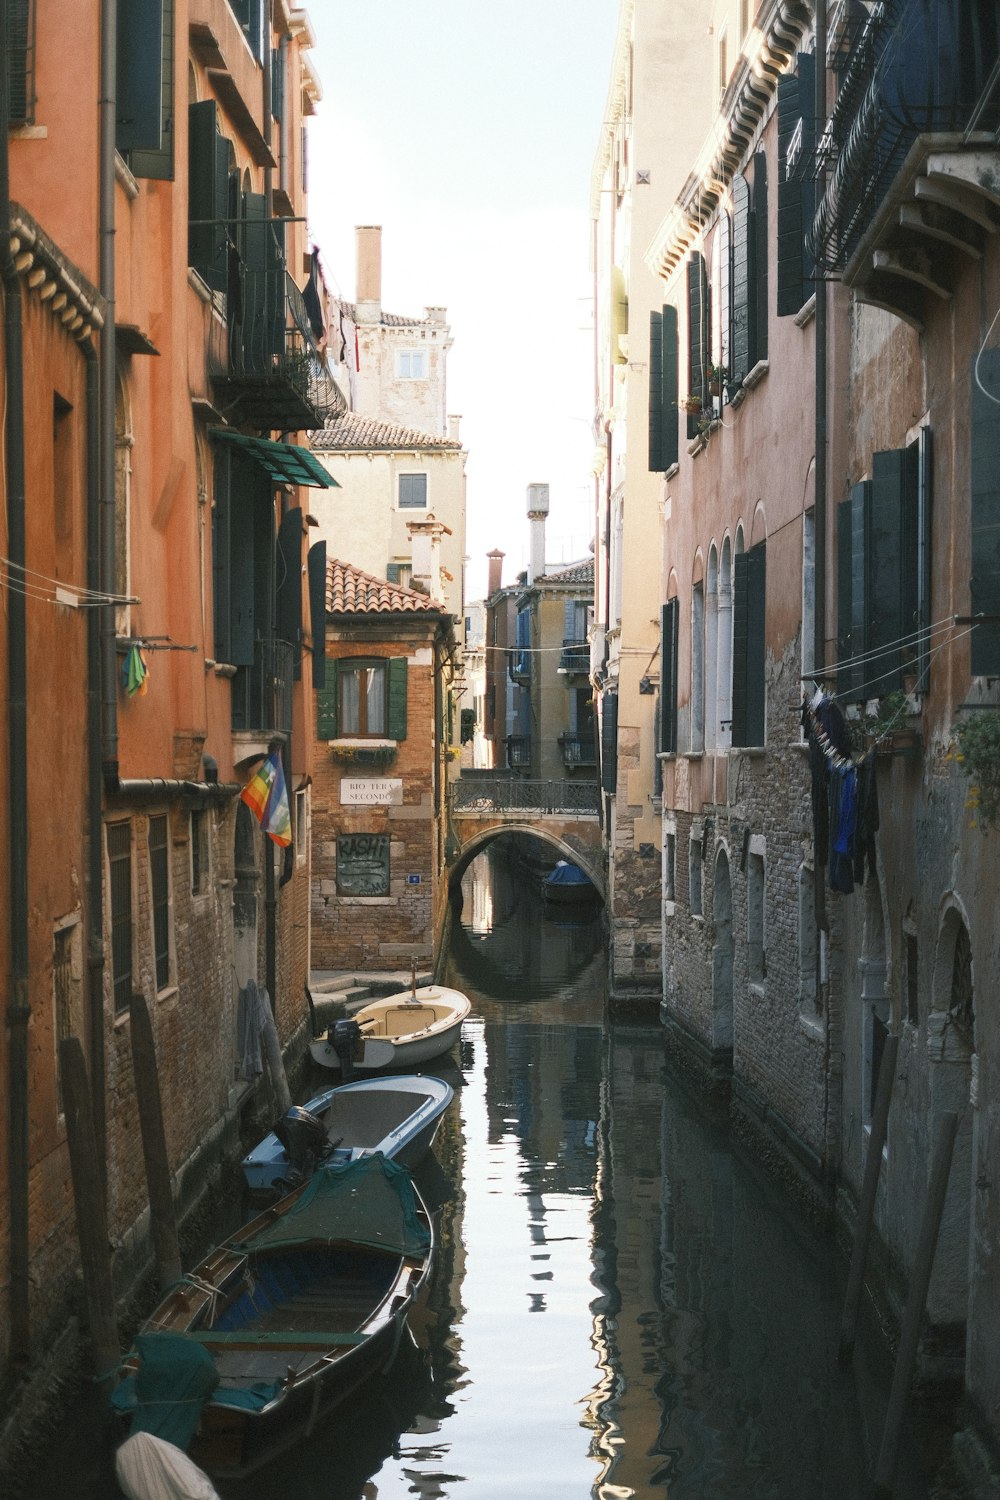 a narrow canal with several boats in it